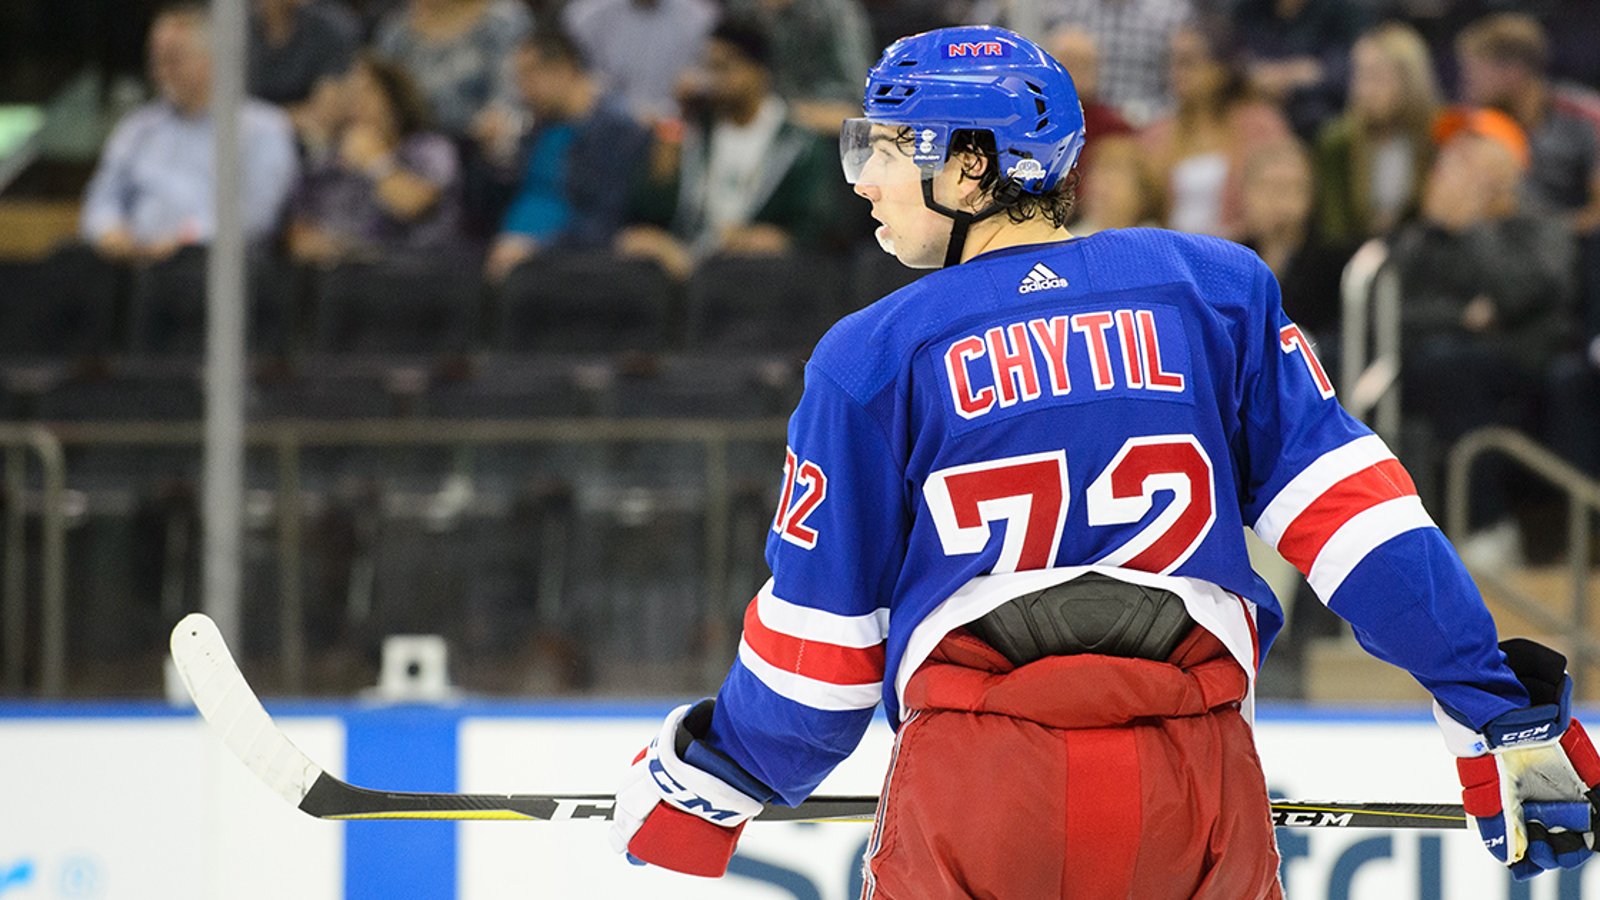 Report: Rangers make a decision on Chytil’s future